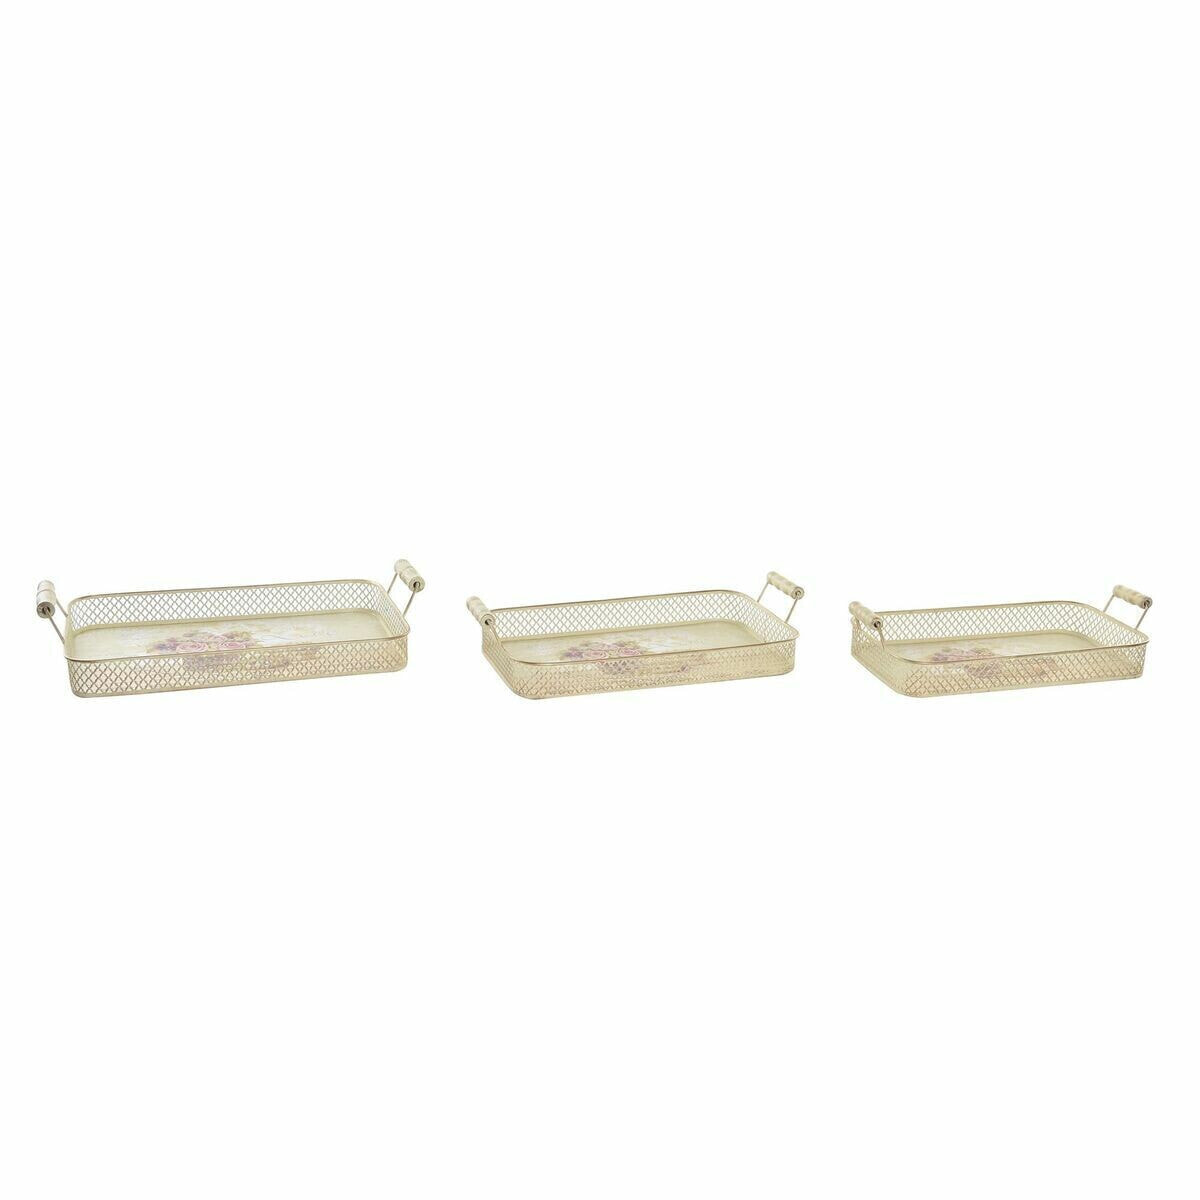 Set of trays DKD Home Decor 40 x 21 x 8 cm Pink Metal 8 cm 3 Pieces Shabby Chic